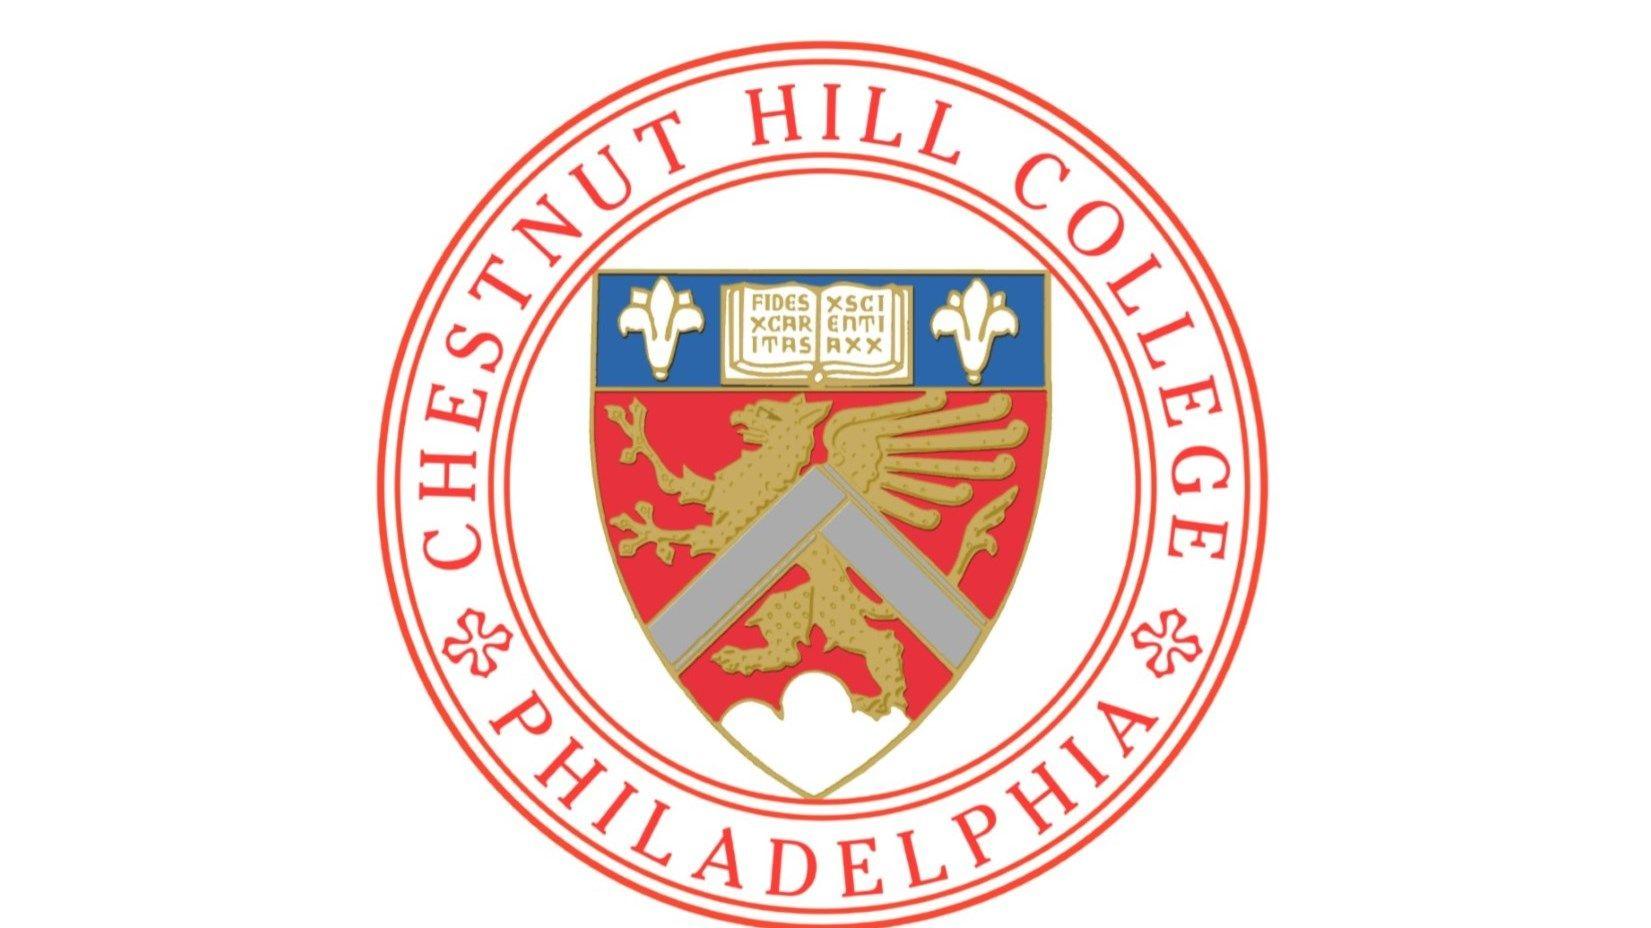 Hill College Logo - Chestnut Hill College Athletics Announces Fall 2017 Academic Honor